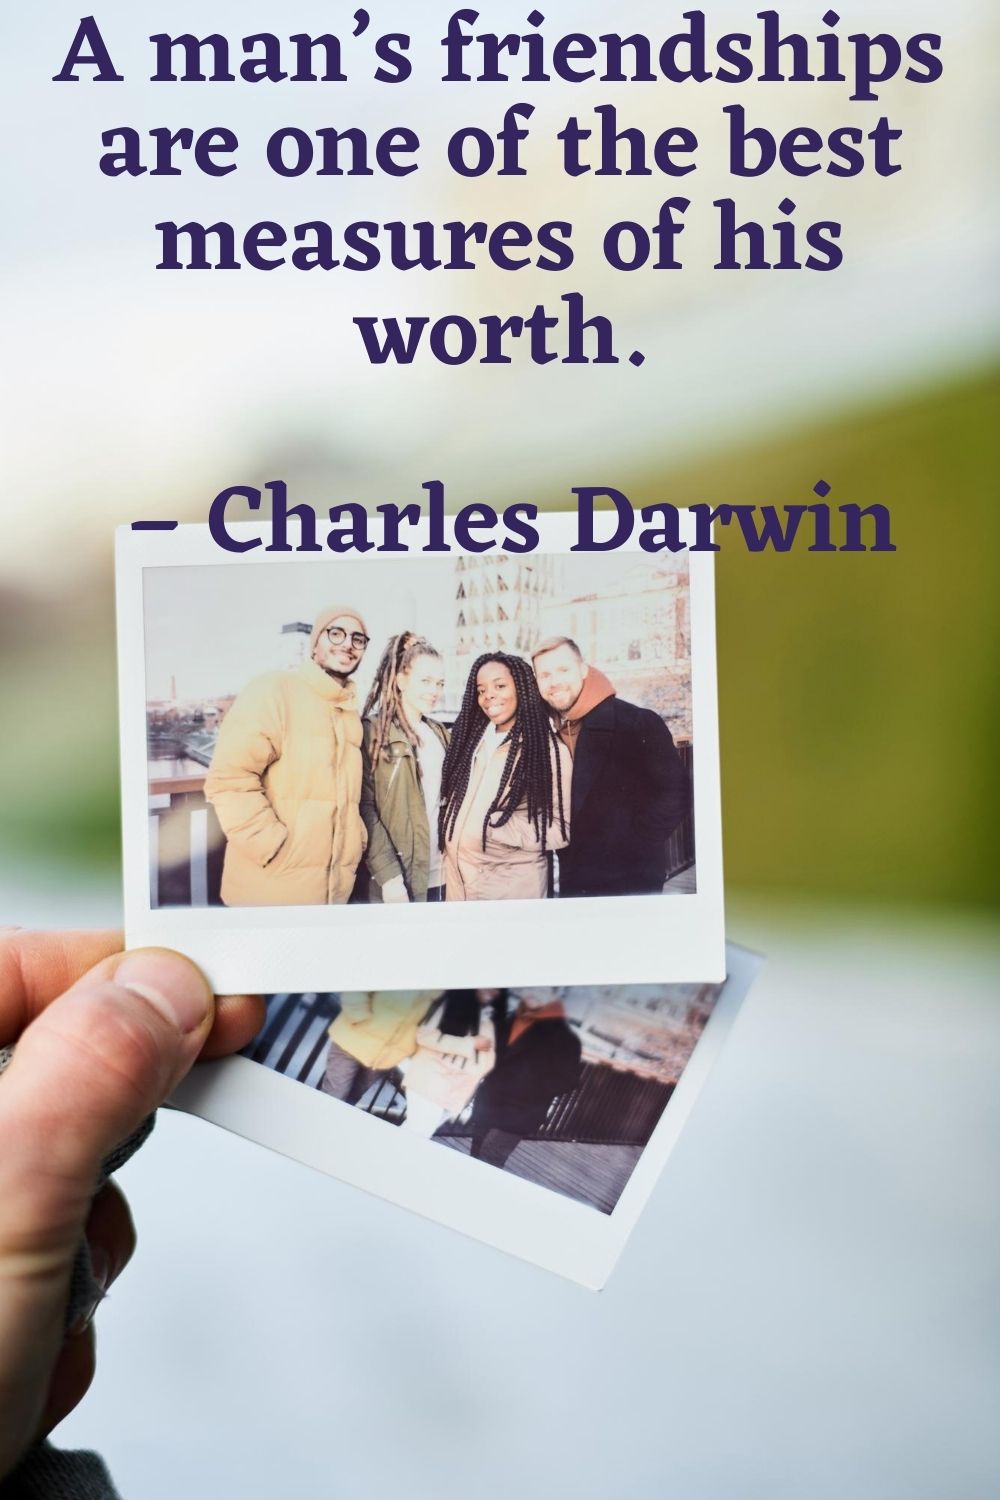 A man’s friendships are one of the best measures of his worth. – Charles Darwin